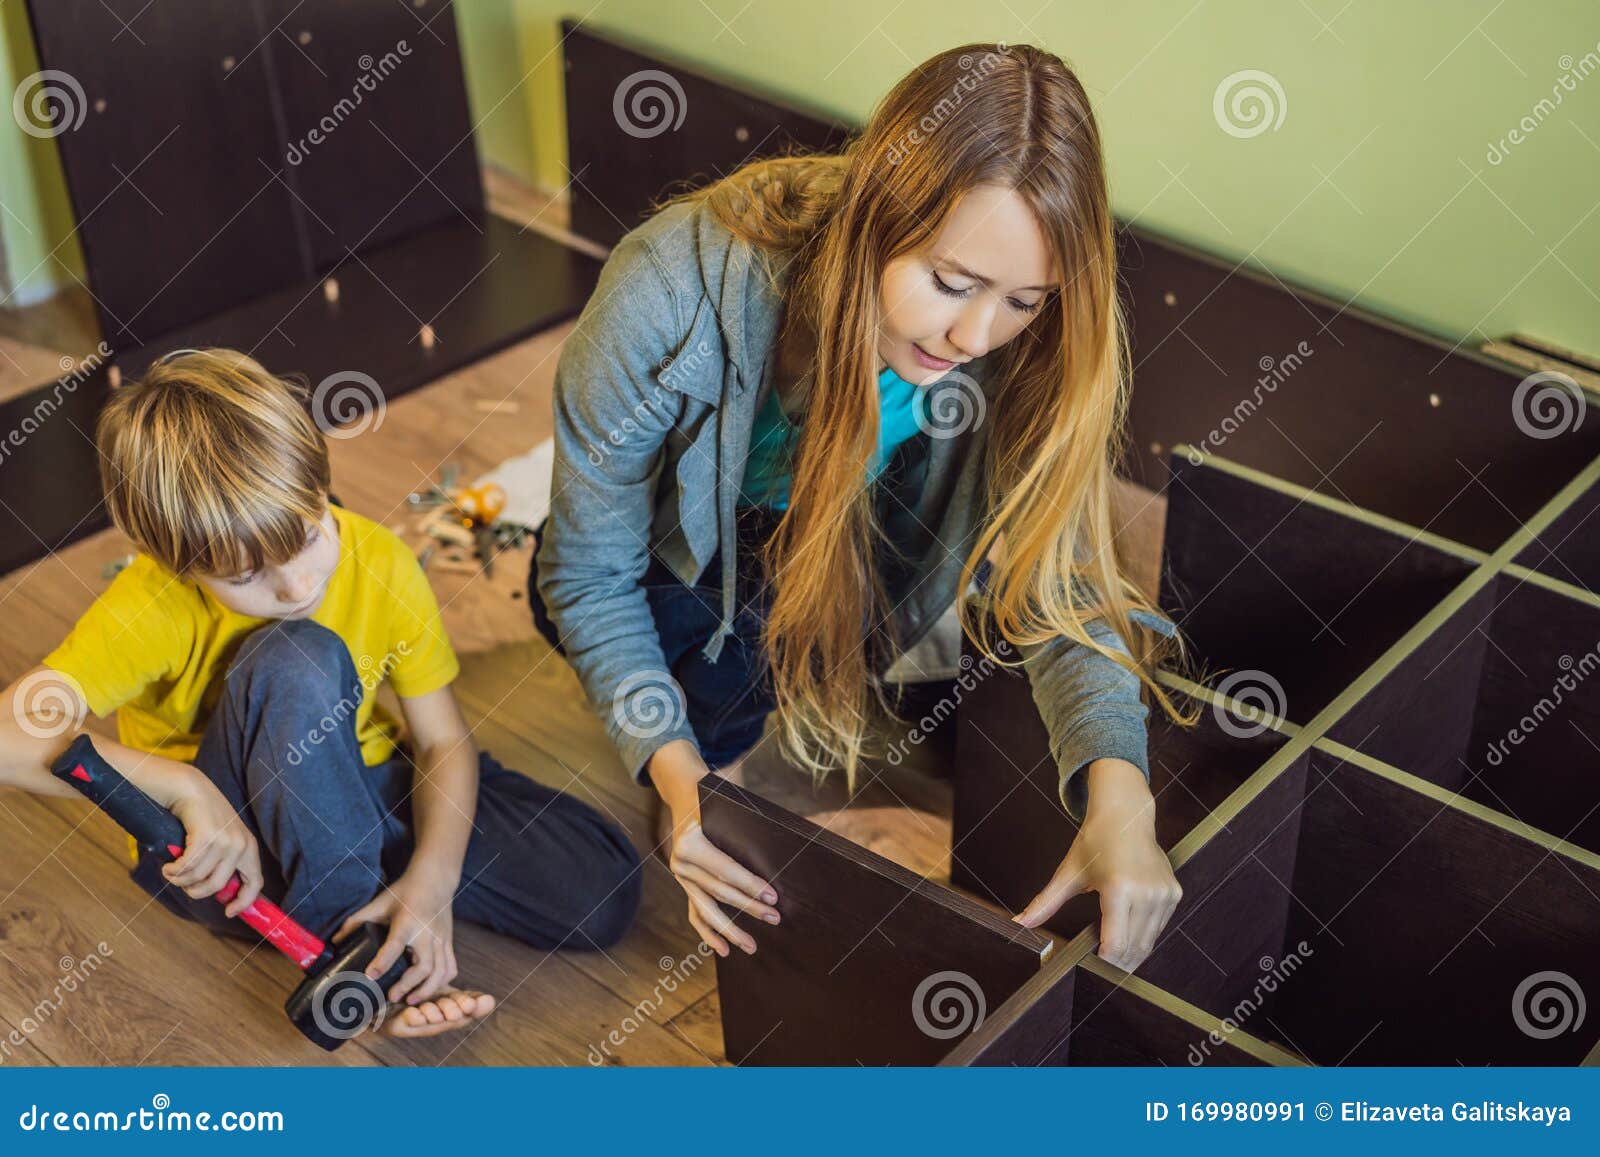 Mother And Son Assembling Furniture Boy Helping His Mom A